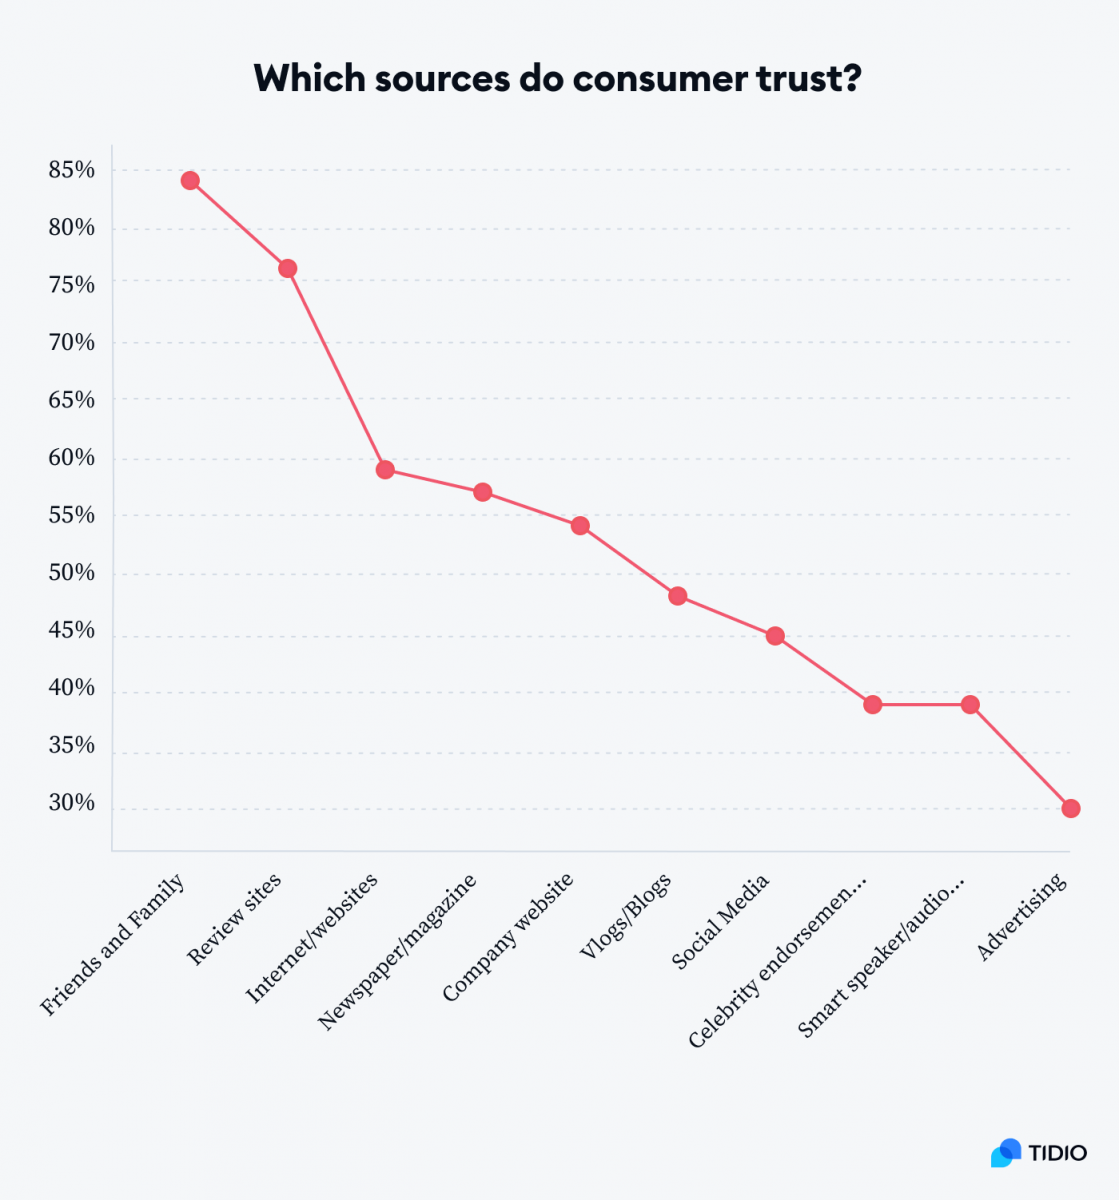 A graph showing which sources do customer trust by percentage